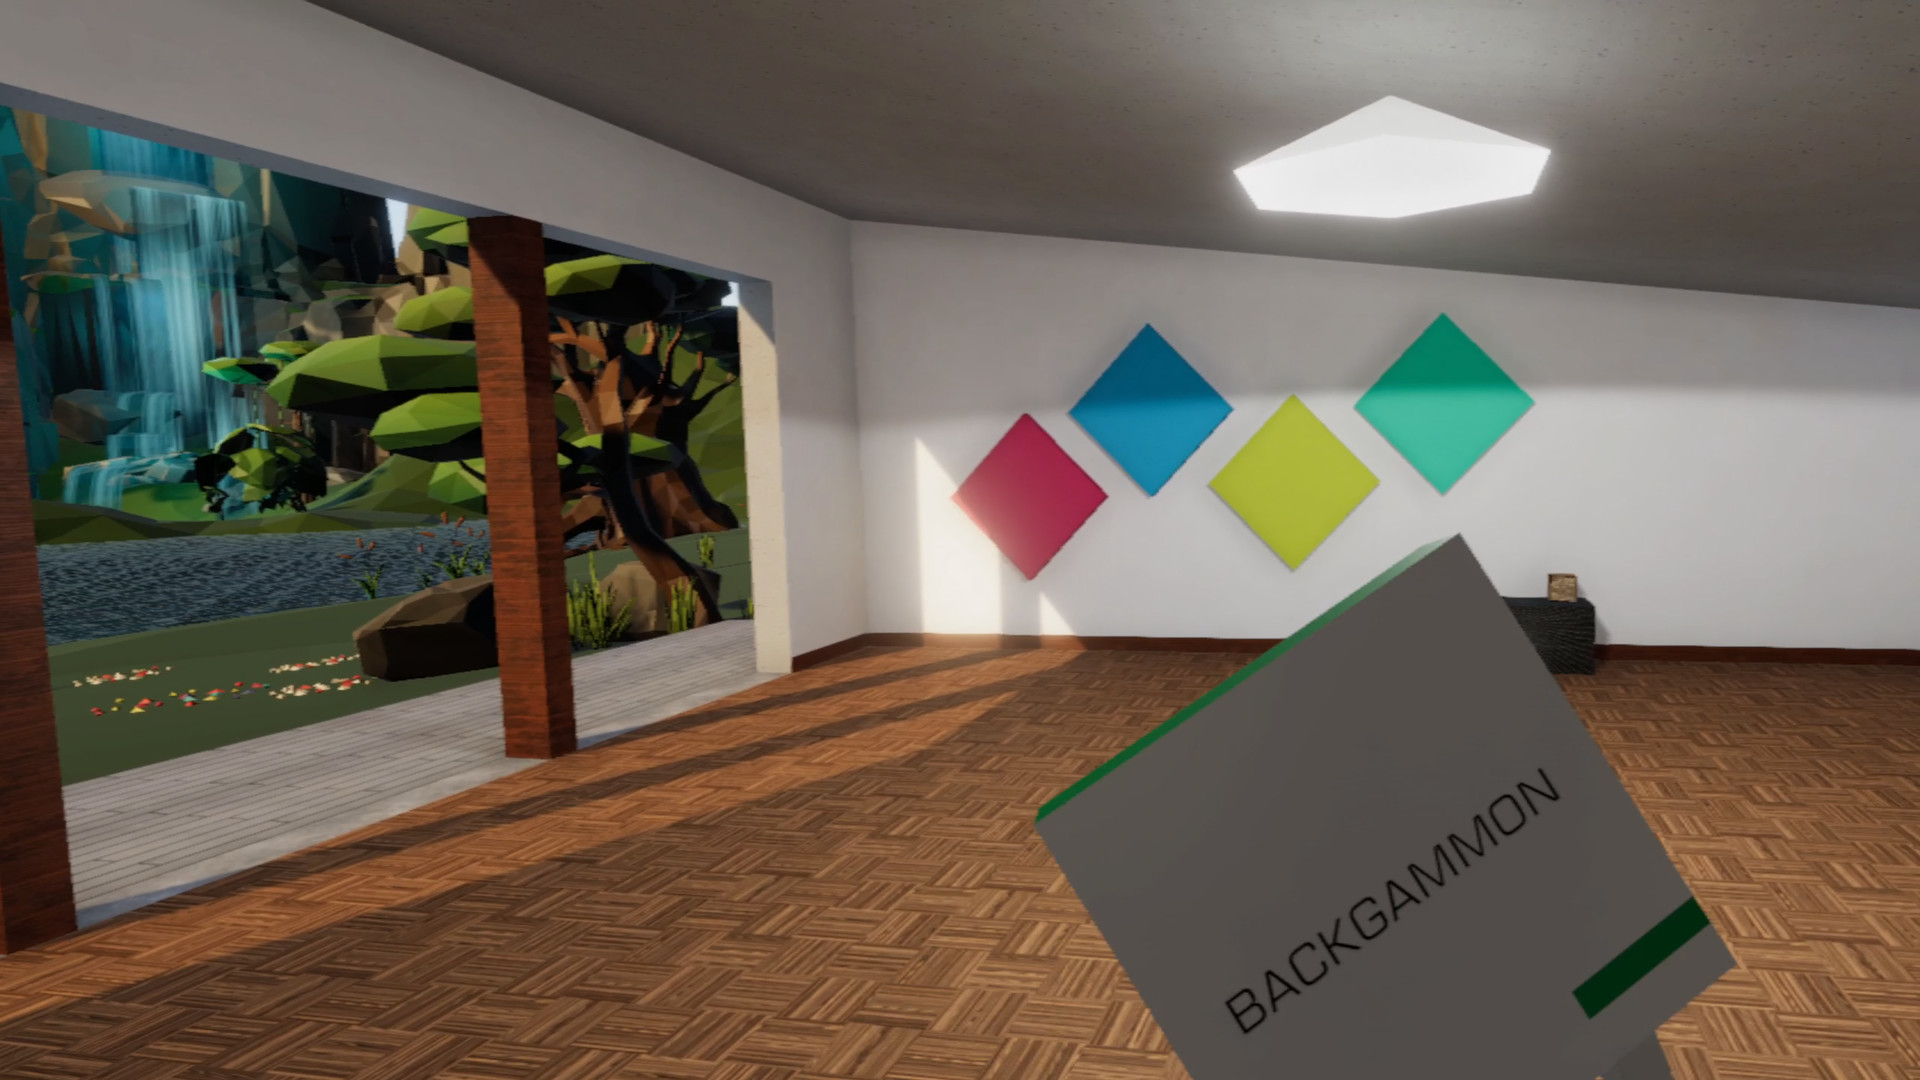 Board Games VR Free Download